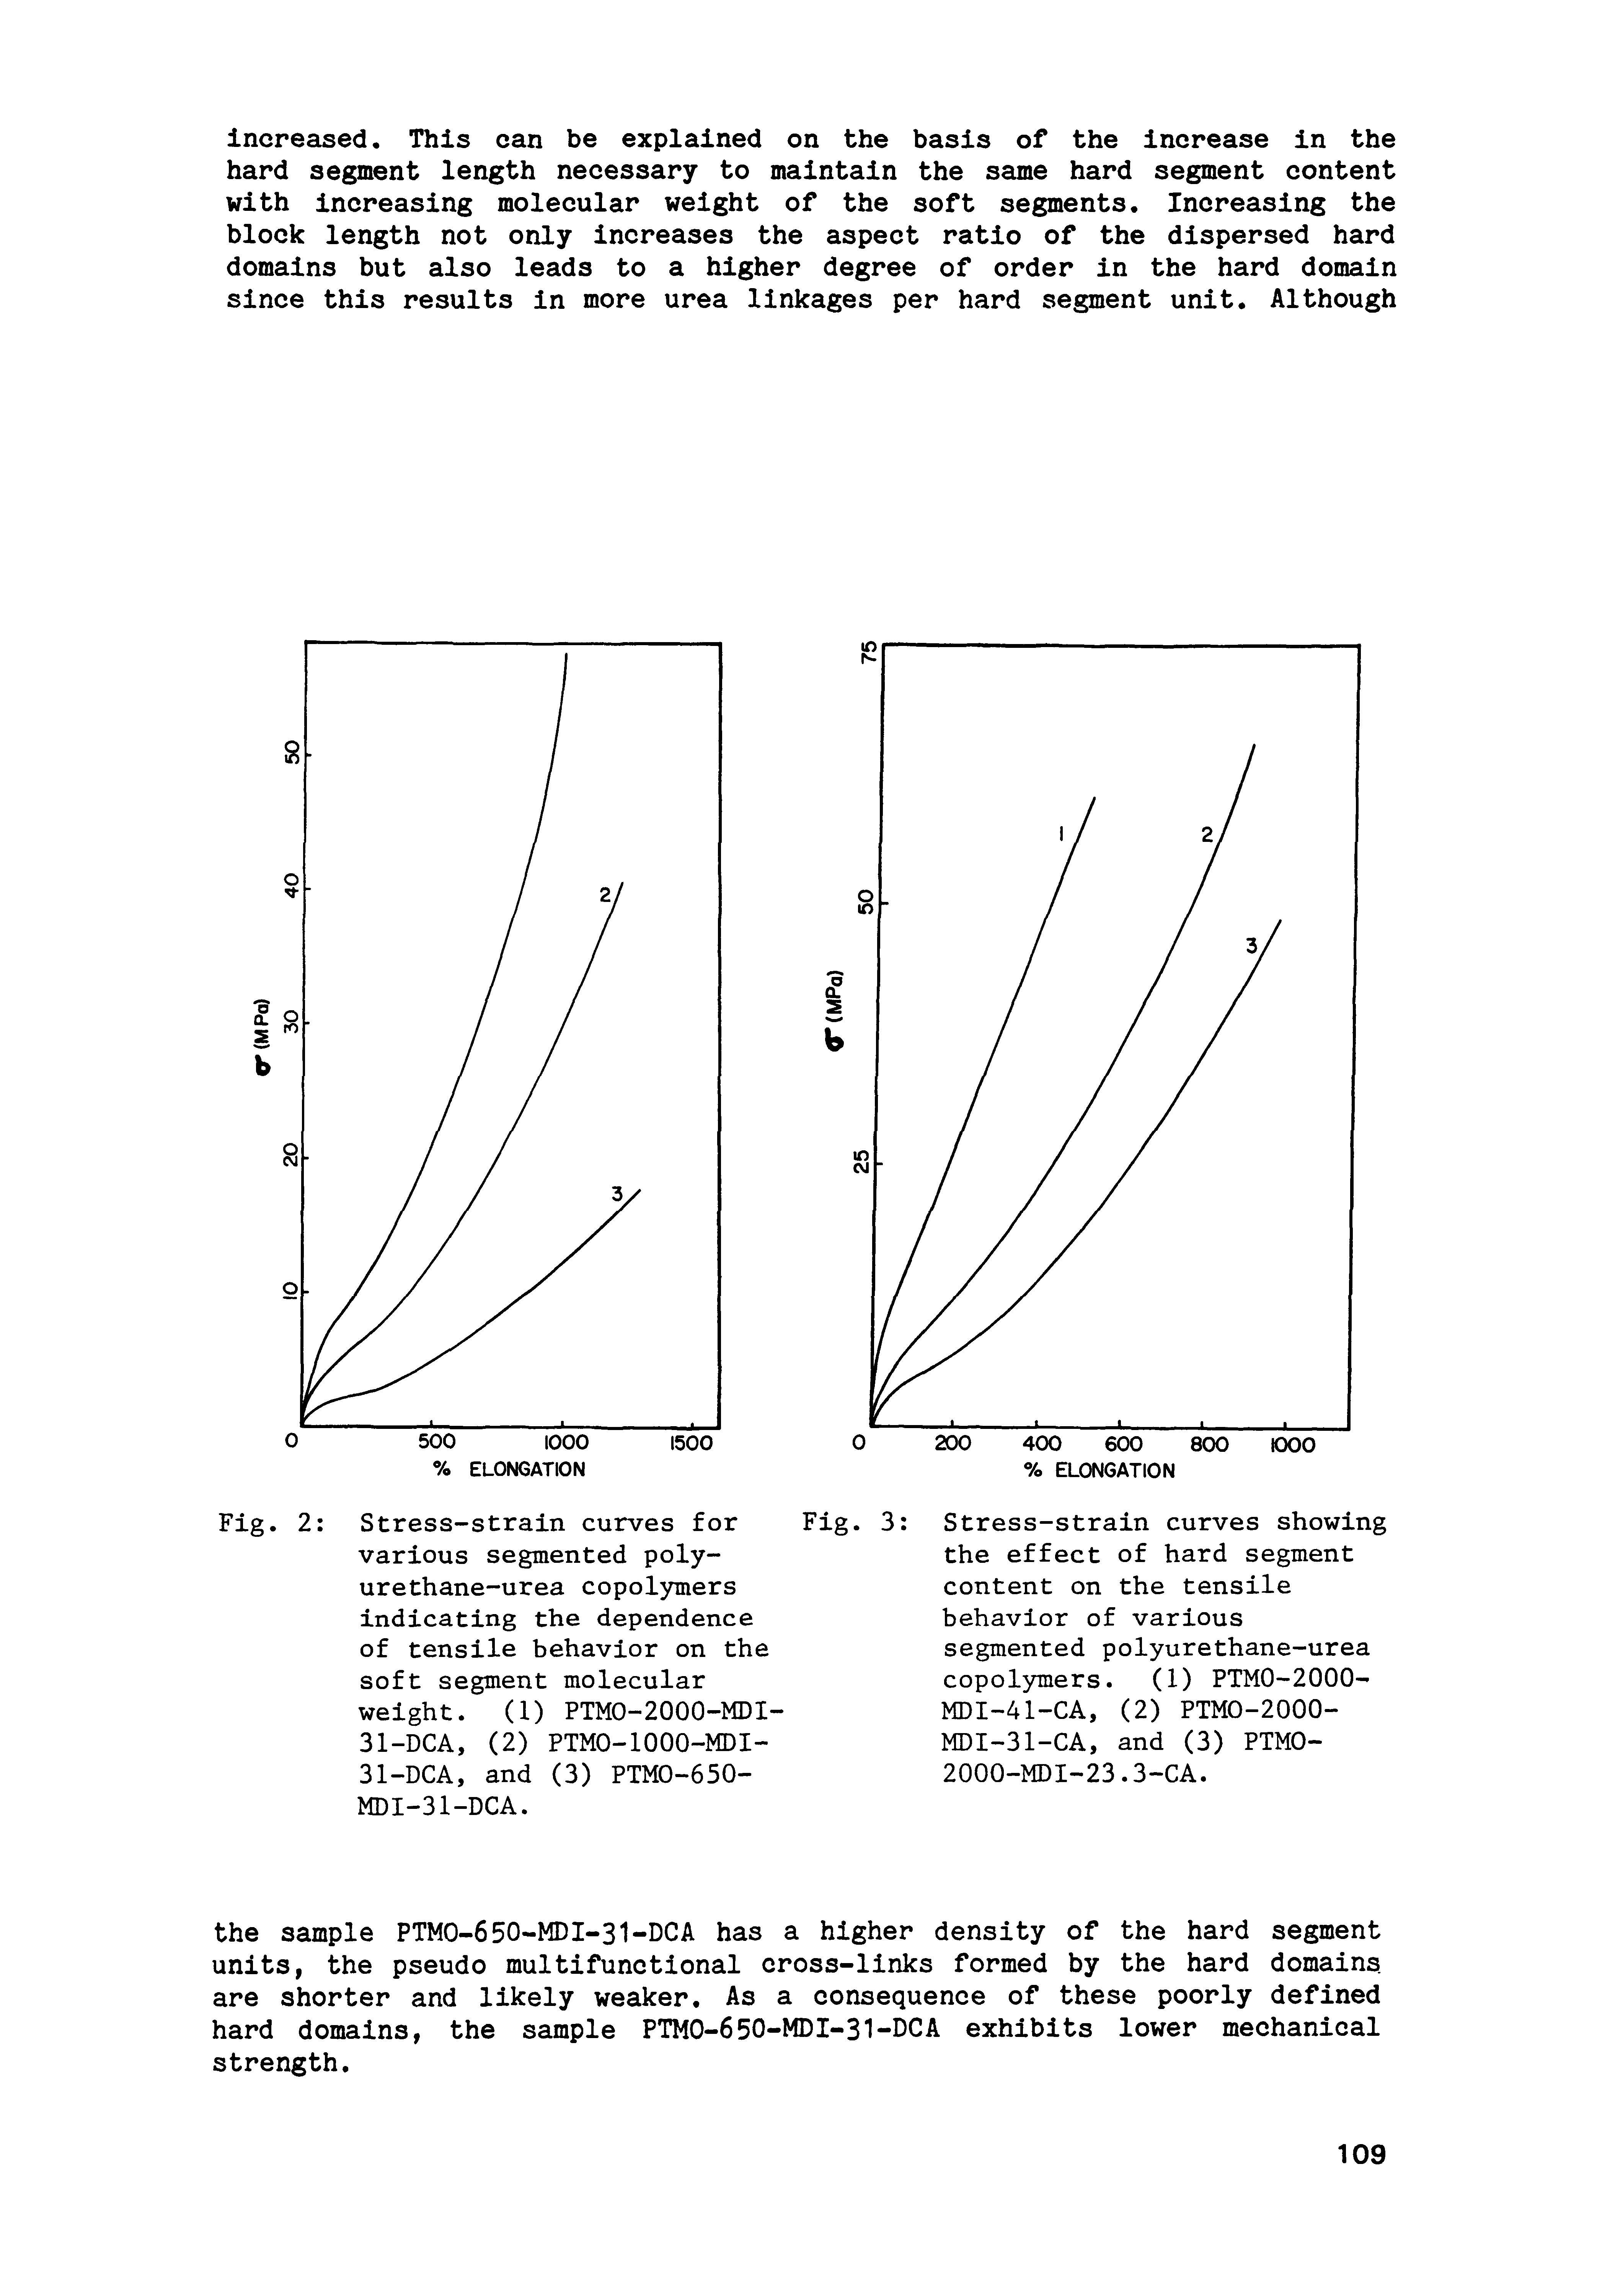 Fig. 2 Stress-strain curves for various segmented polyurethane-urea copol3rniers indicating the dependence of tensile behavior on the soft segment molecular weight. (1) PTMO-2000-MDI-31-DCA, (2) PTMO-IOOO-MDI-31-DCA, and (3) PTMO-650-MDI-31-DCA.